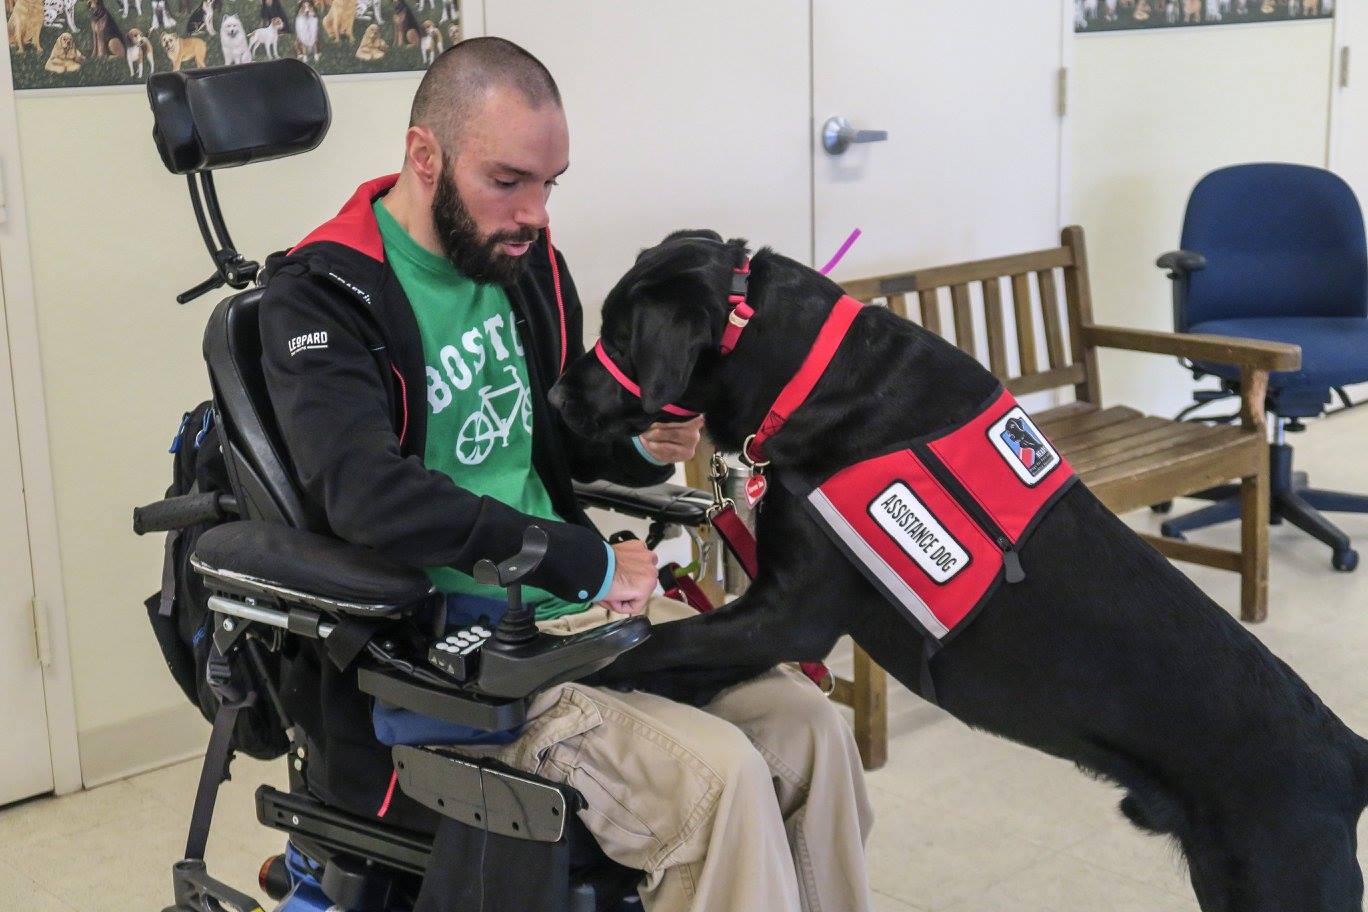 Answering The Faq About My Service Dog Sciboston Org